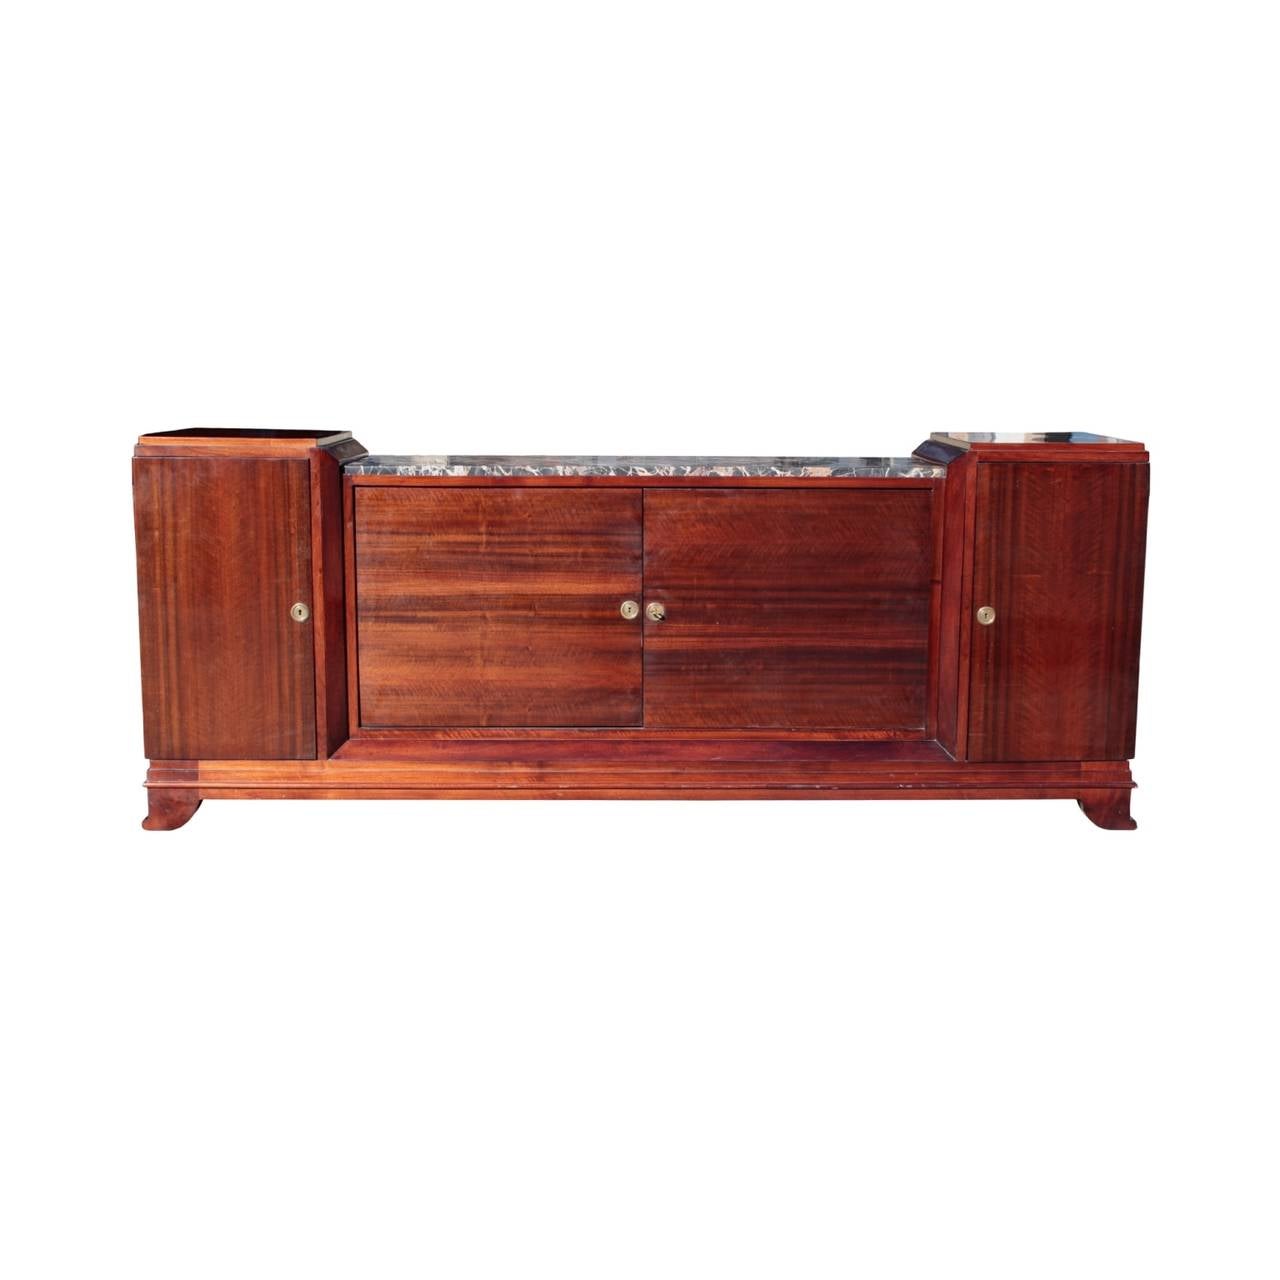 French Art Deco buffet of imposing volume and stark elegance. Recessed middle cabinet with two doors enclosing a single shelf and having a Negro Portoro marble top, flanked by a pair of taller side cabinets each with a single shelf interior. Four